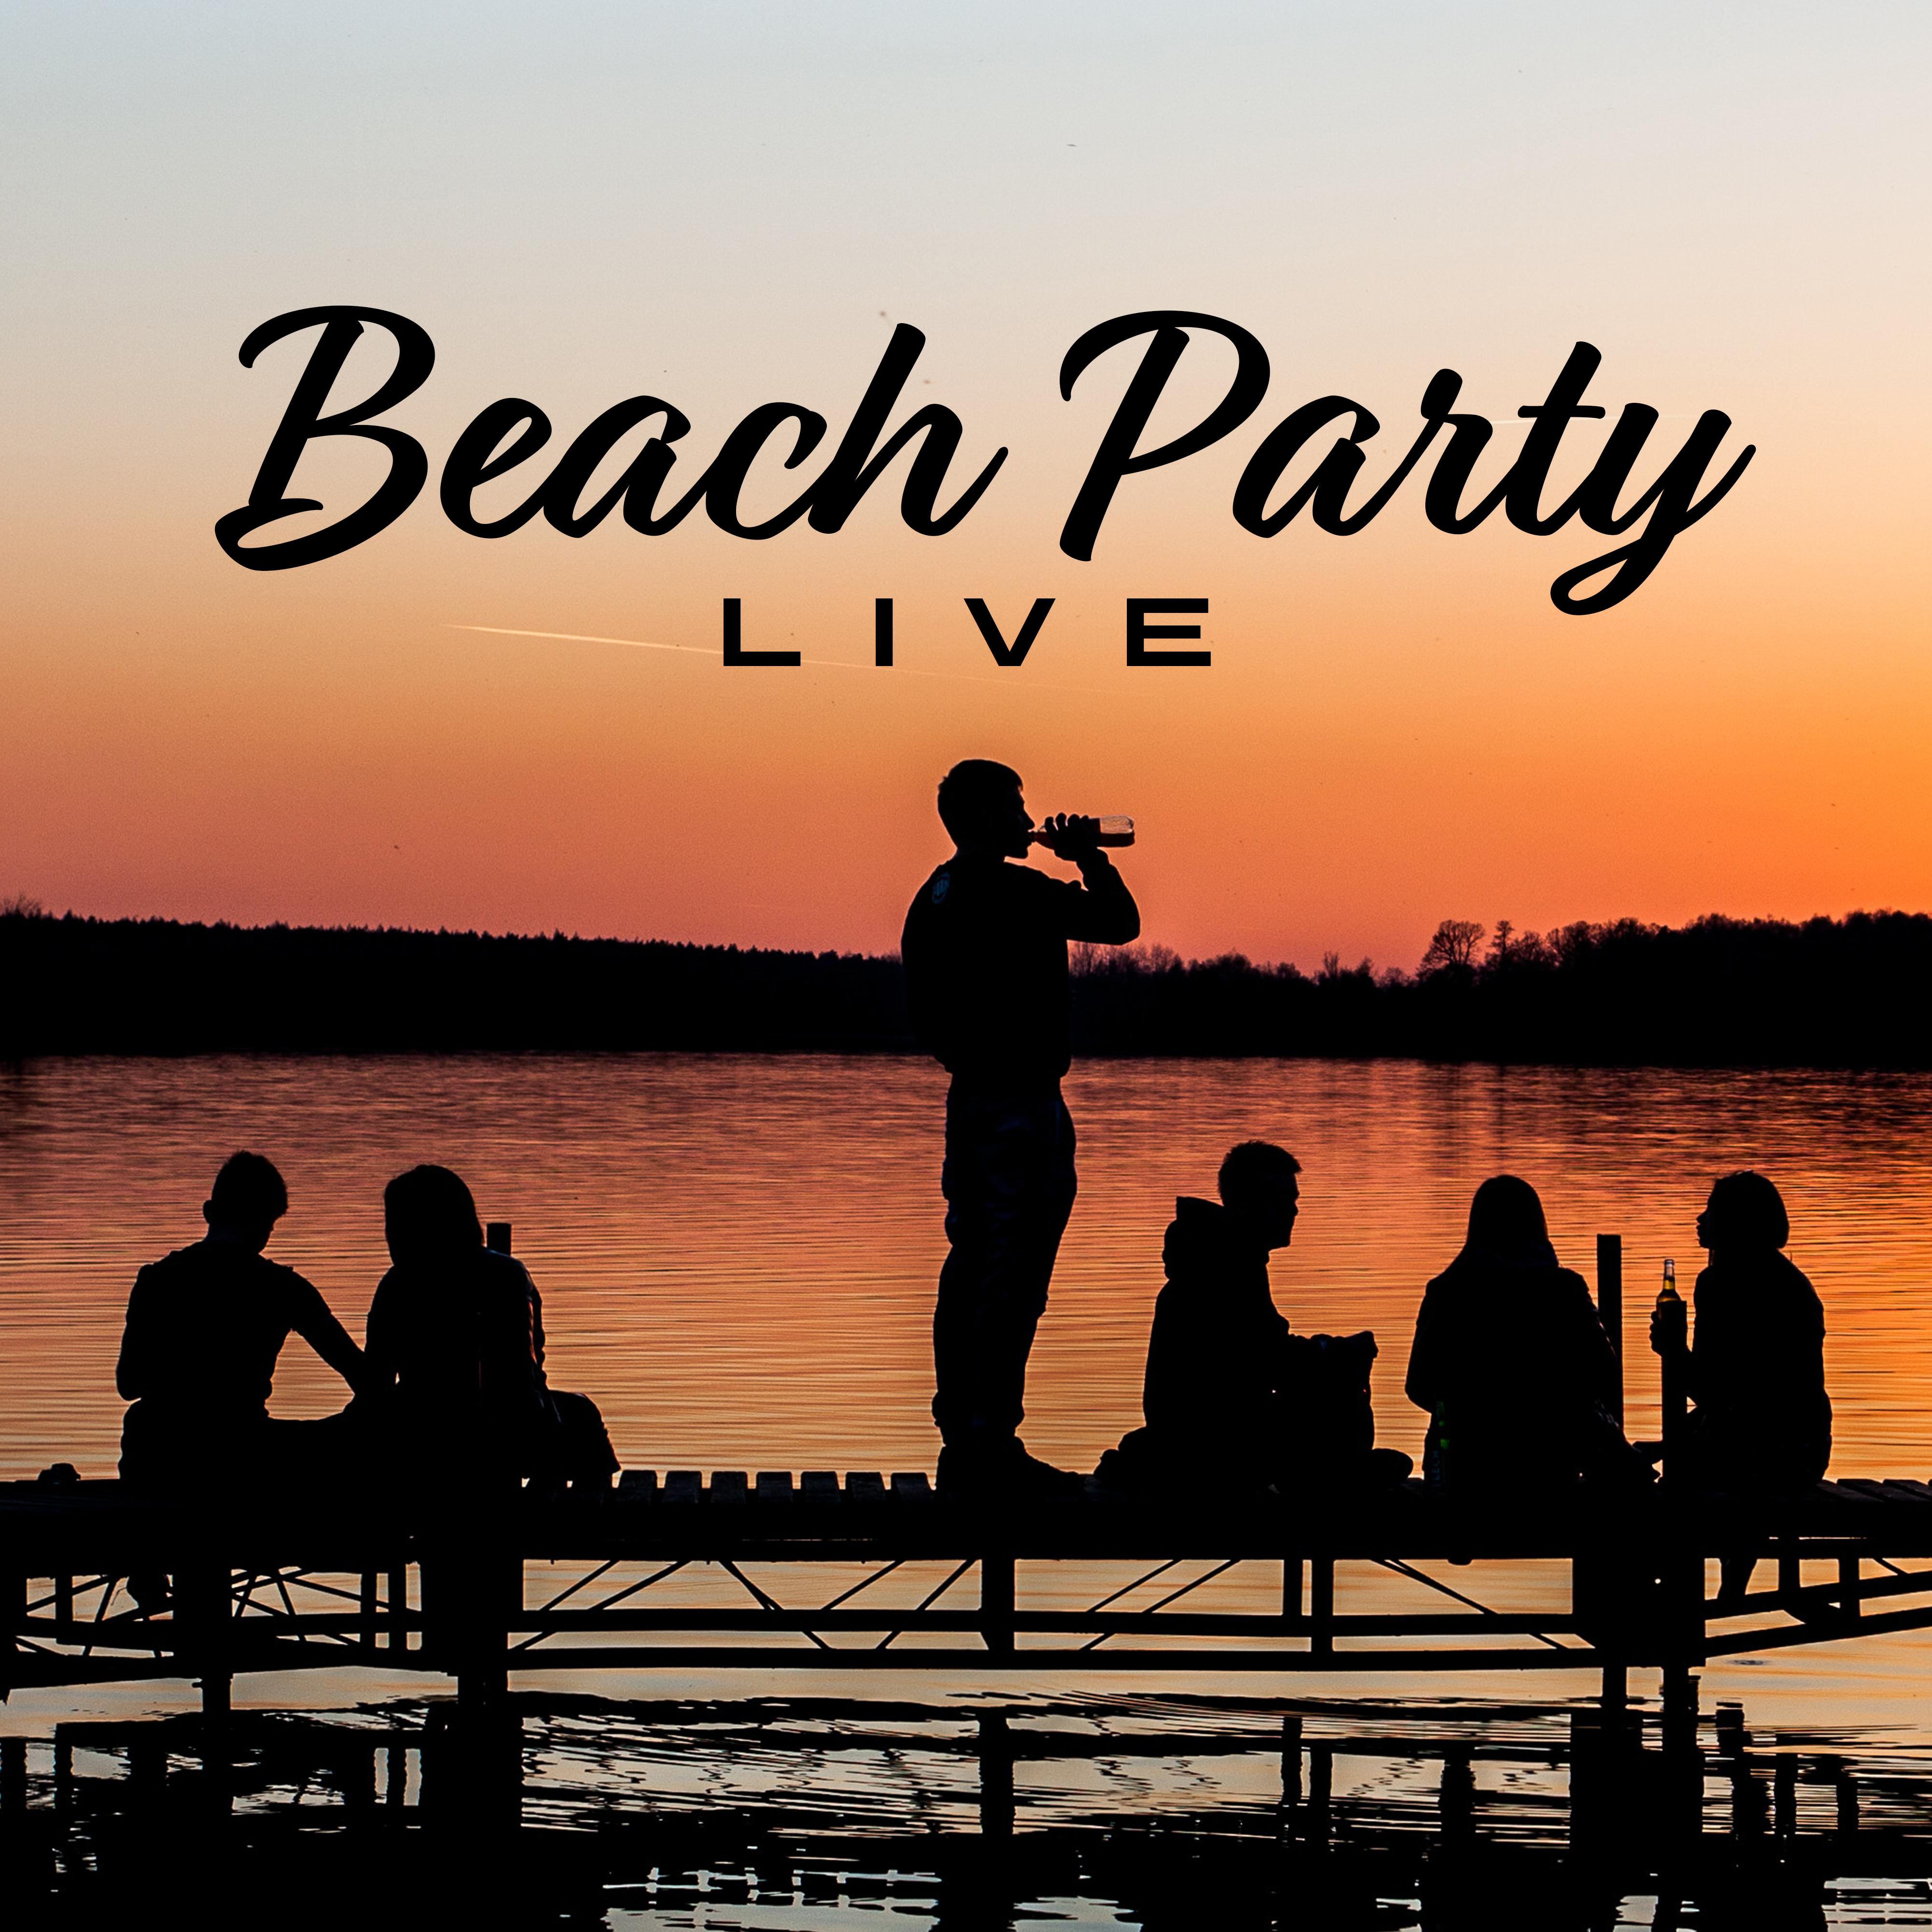 Beach Party Live